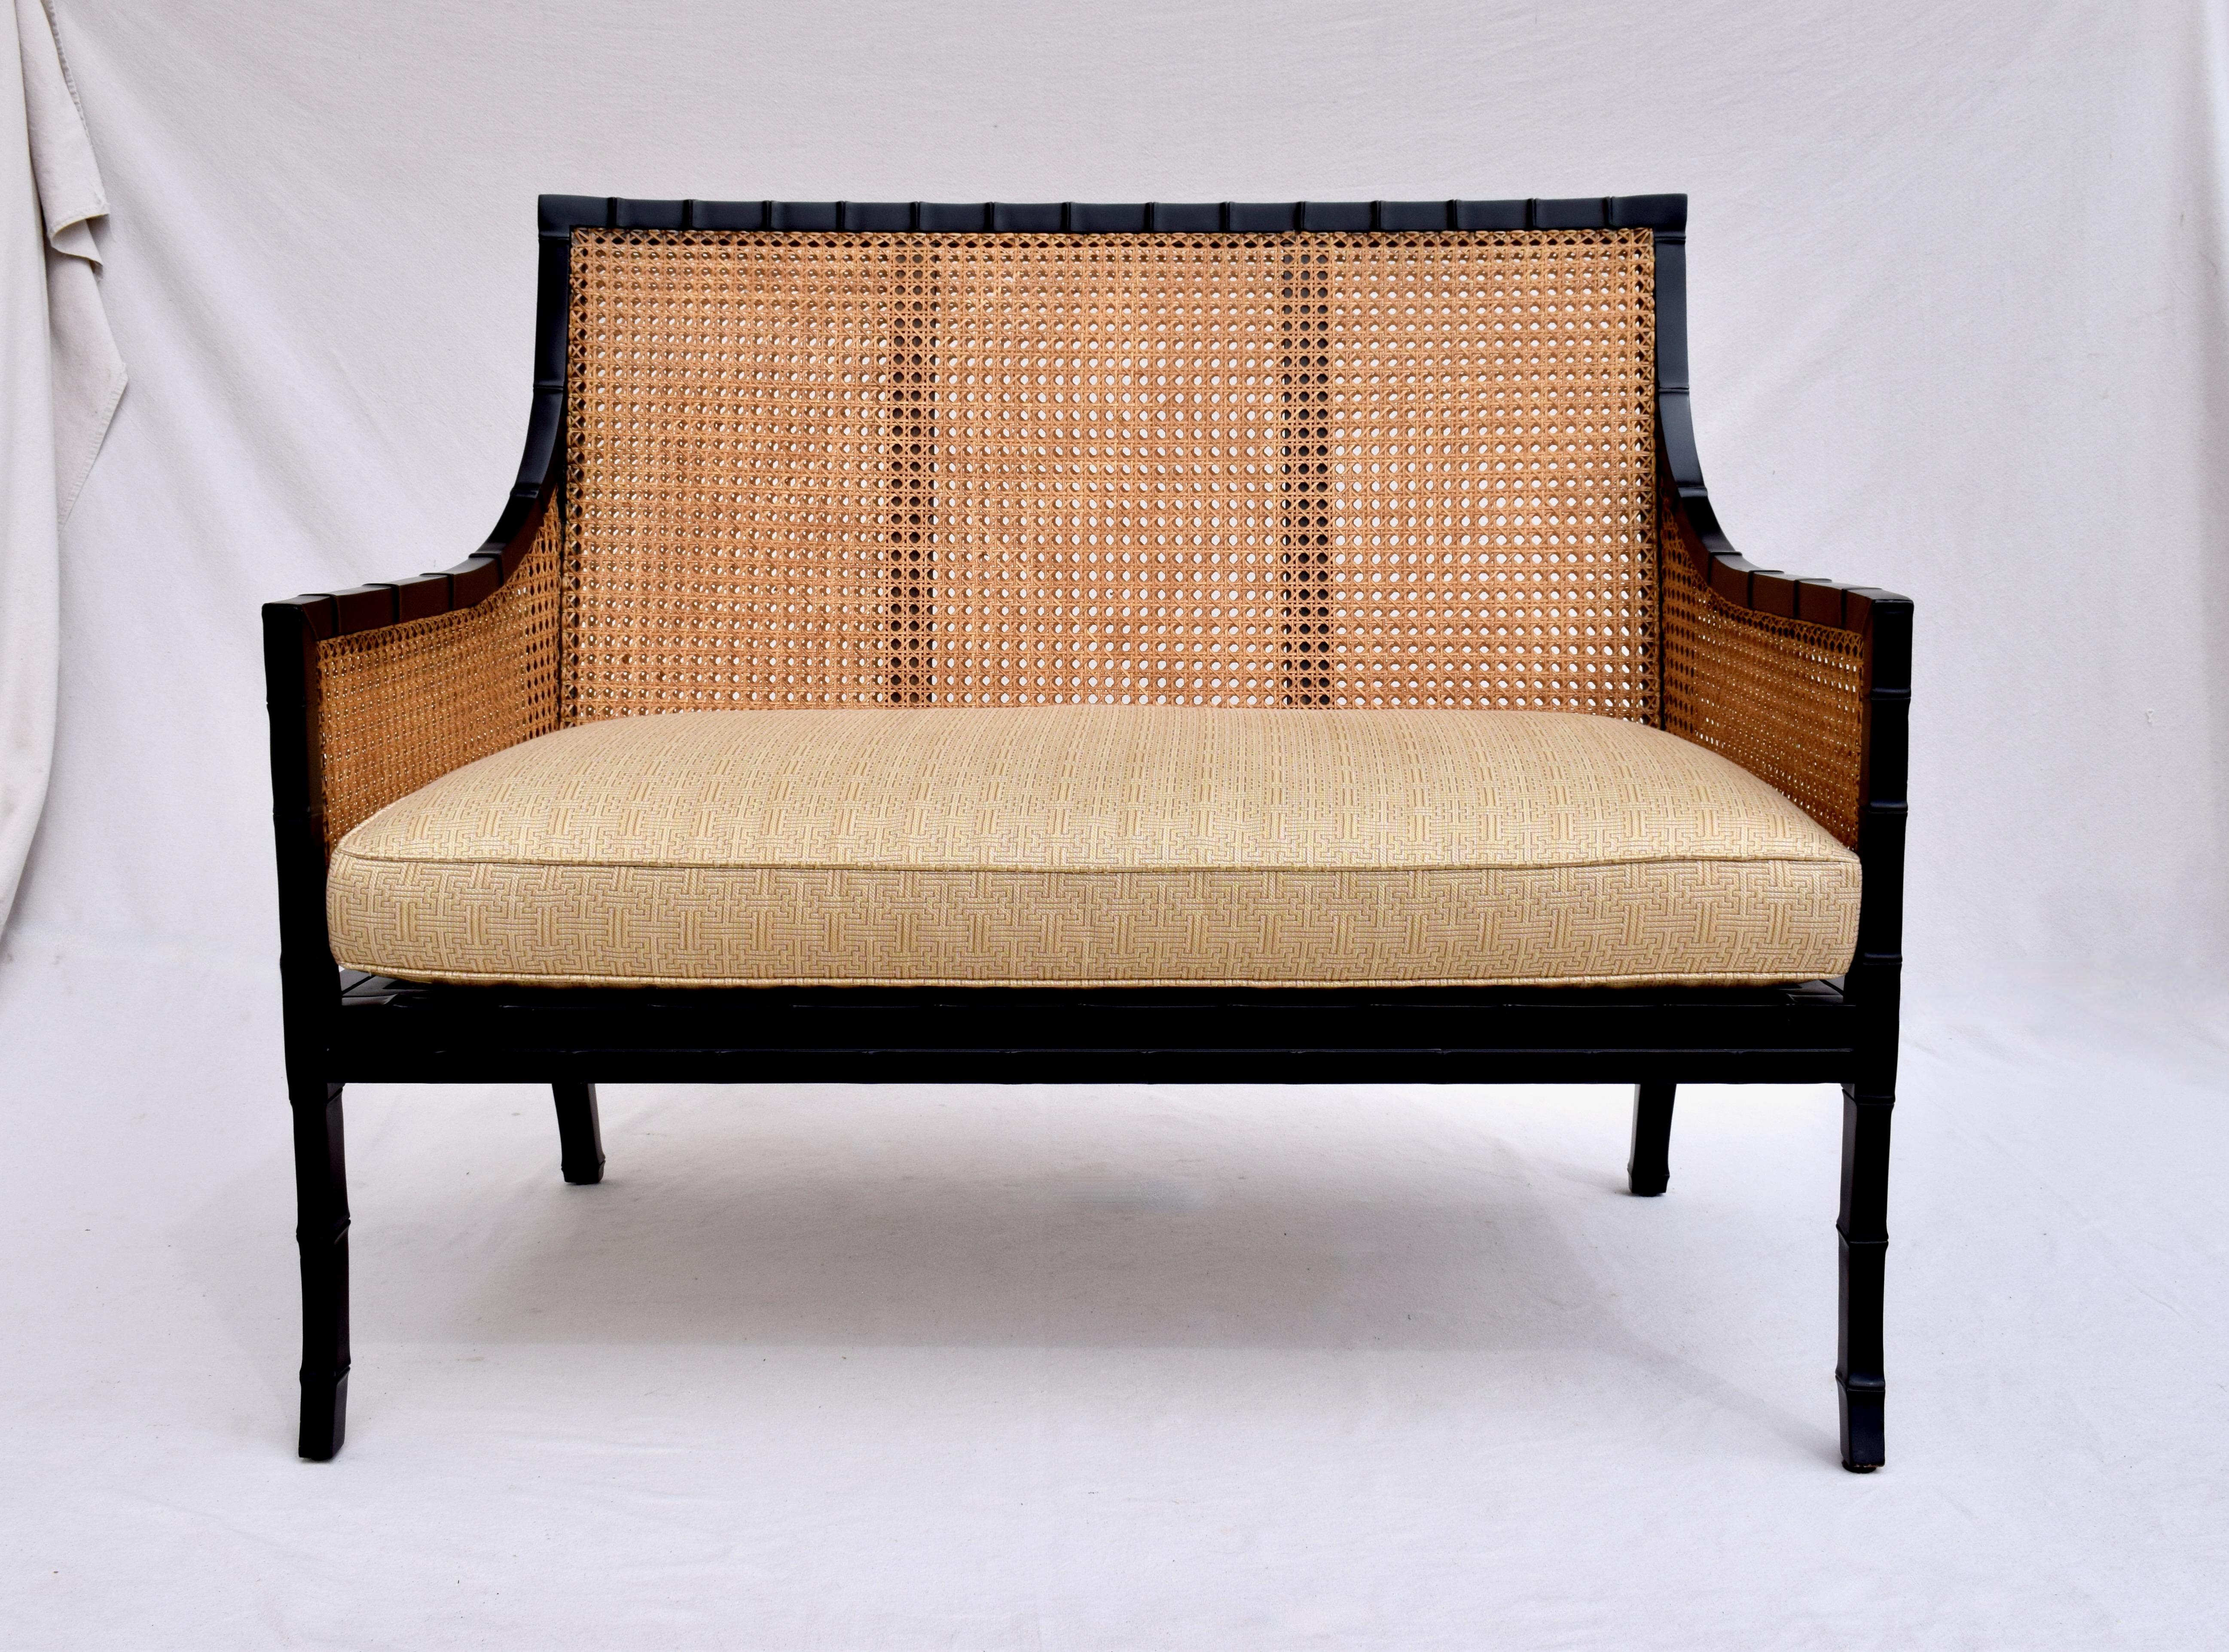 A handsome double sided cane settee of heavy ebony lacquered bamboo form wood expertly crafted to absolute perfection. Large in scale this custom beauty features three expertly upholstered goose down cushions designed to highlight a special space.